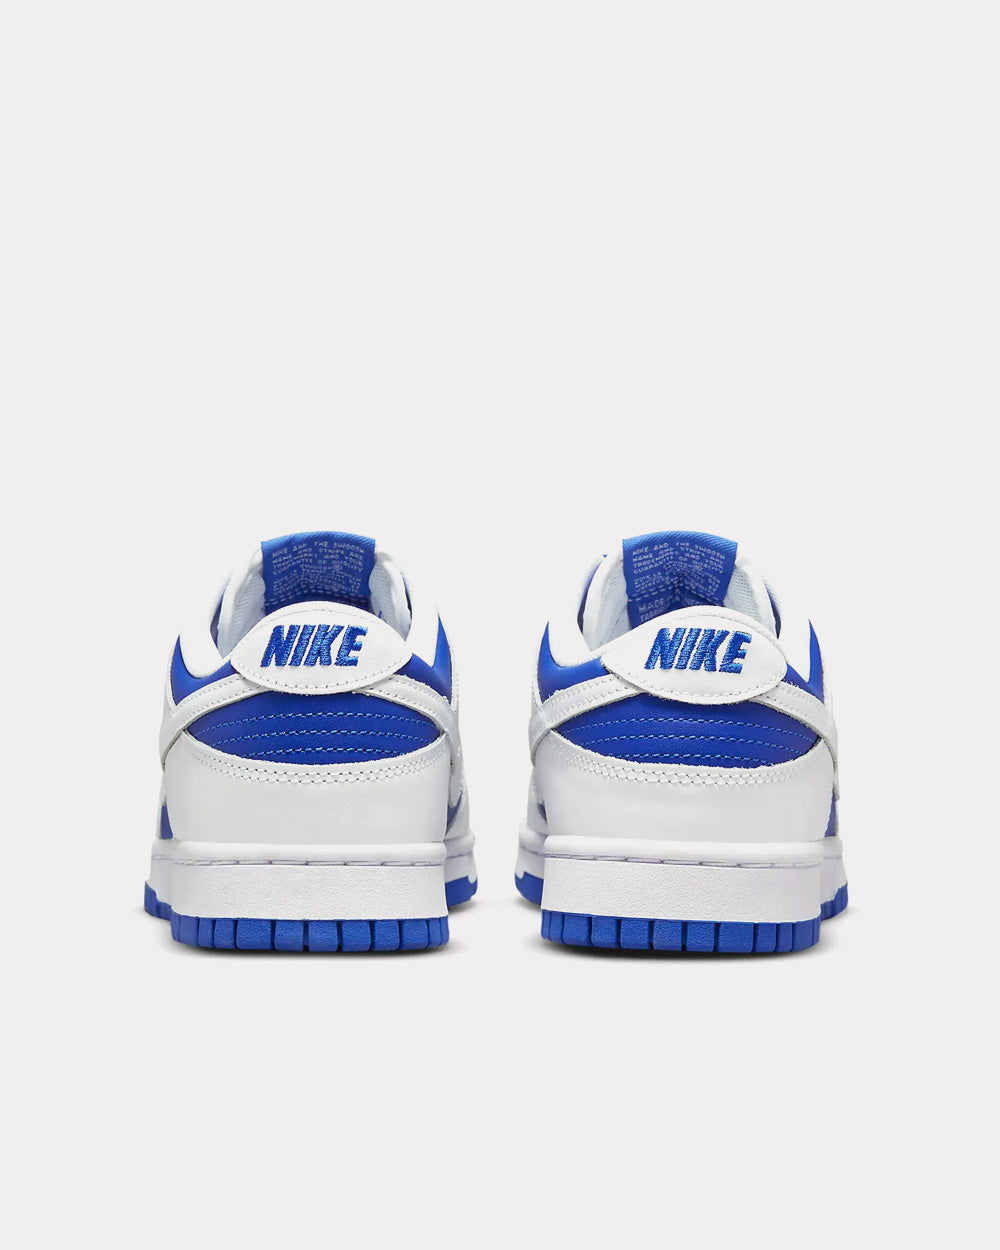 Nike Dunk Low Retro Racer Blue / White / Racer Blue Low Top 